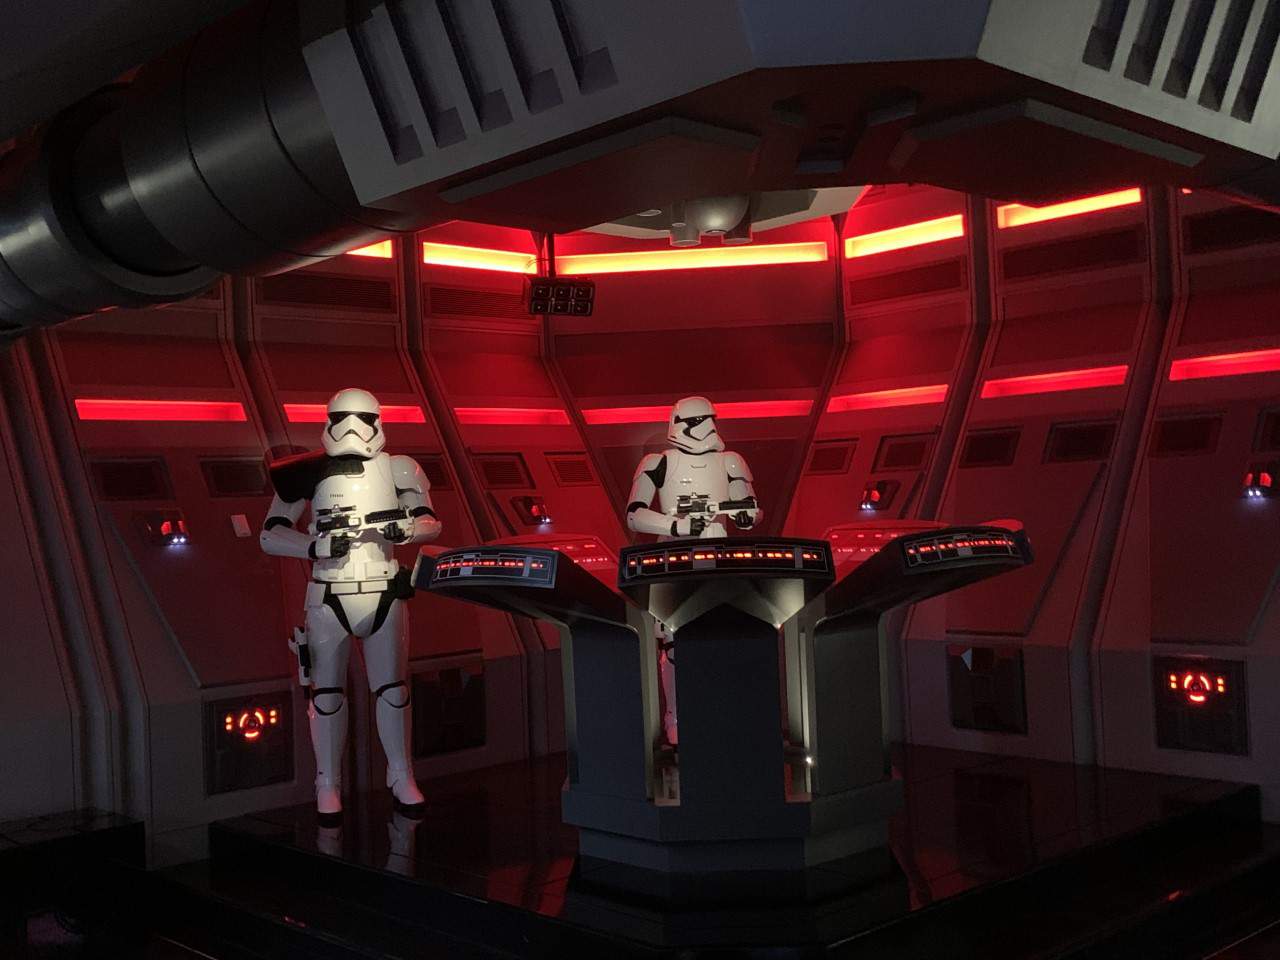 The force is changing: Disney to adjust Rise of the Resistance virtual queue system